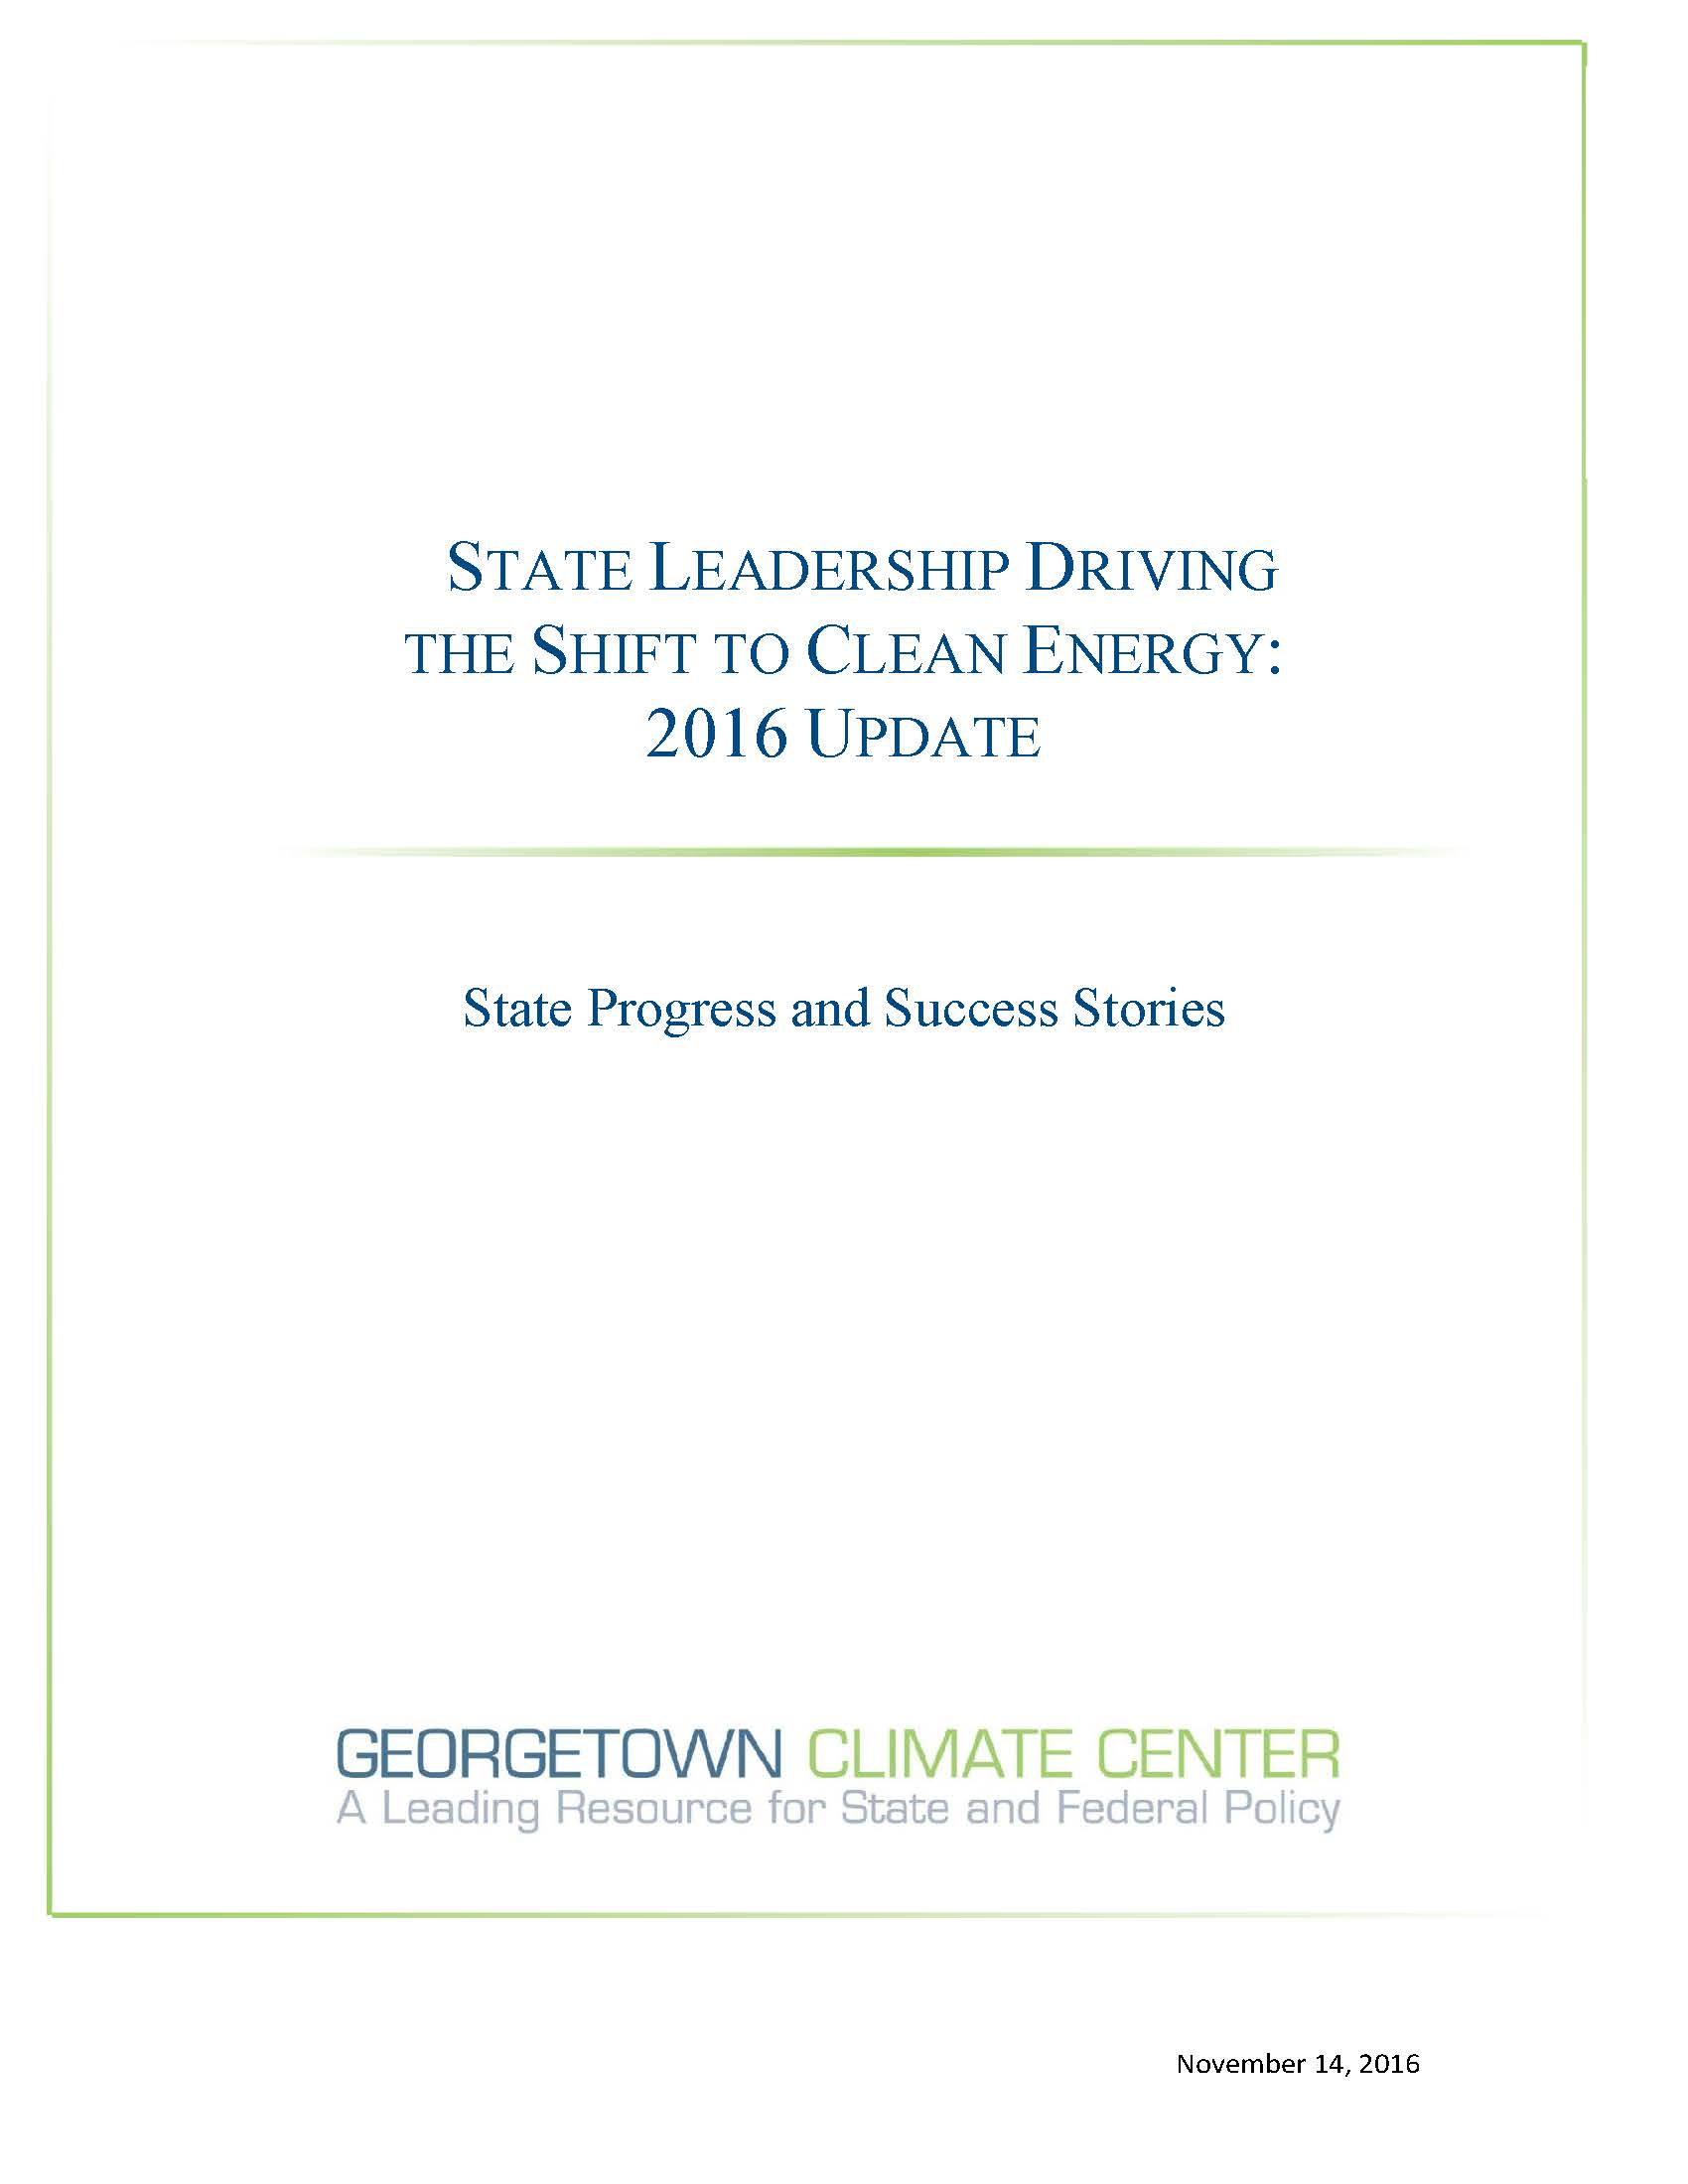 State Leadership Driving the Shift to Clean Energy: 2016 Update